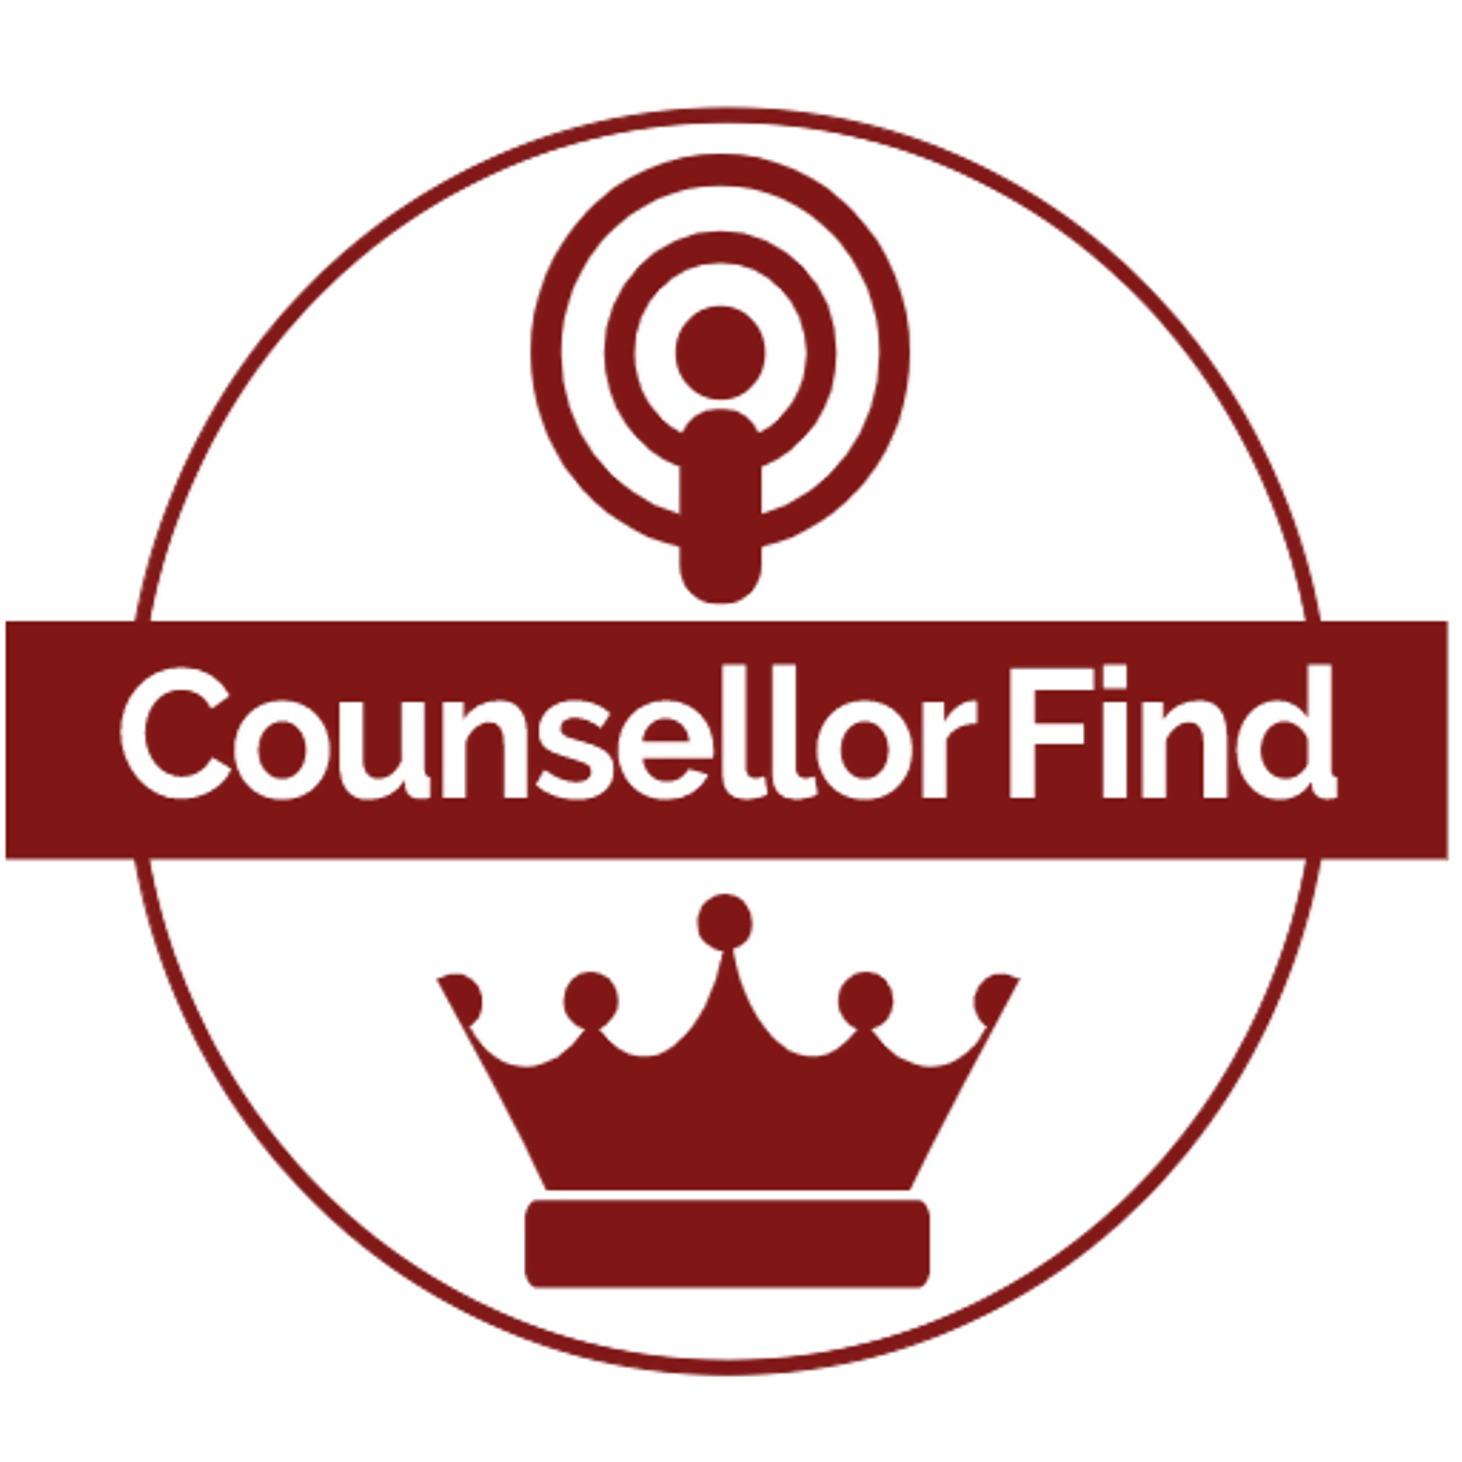 Counsellor Find